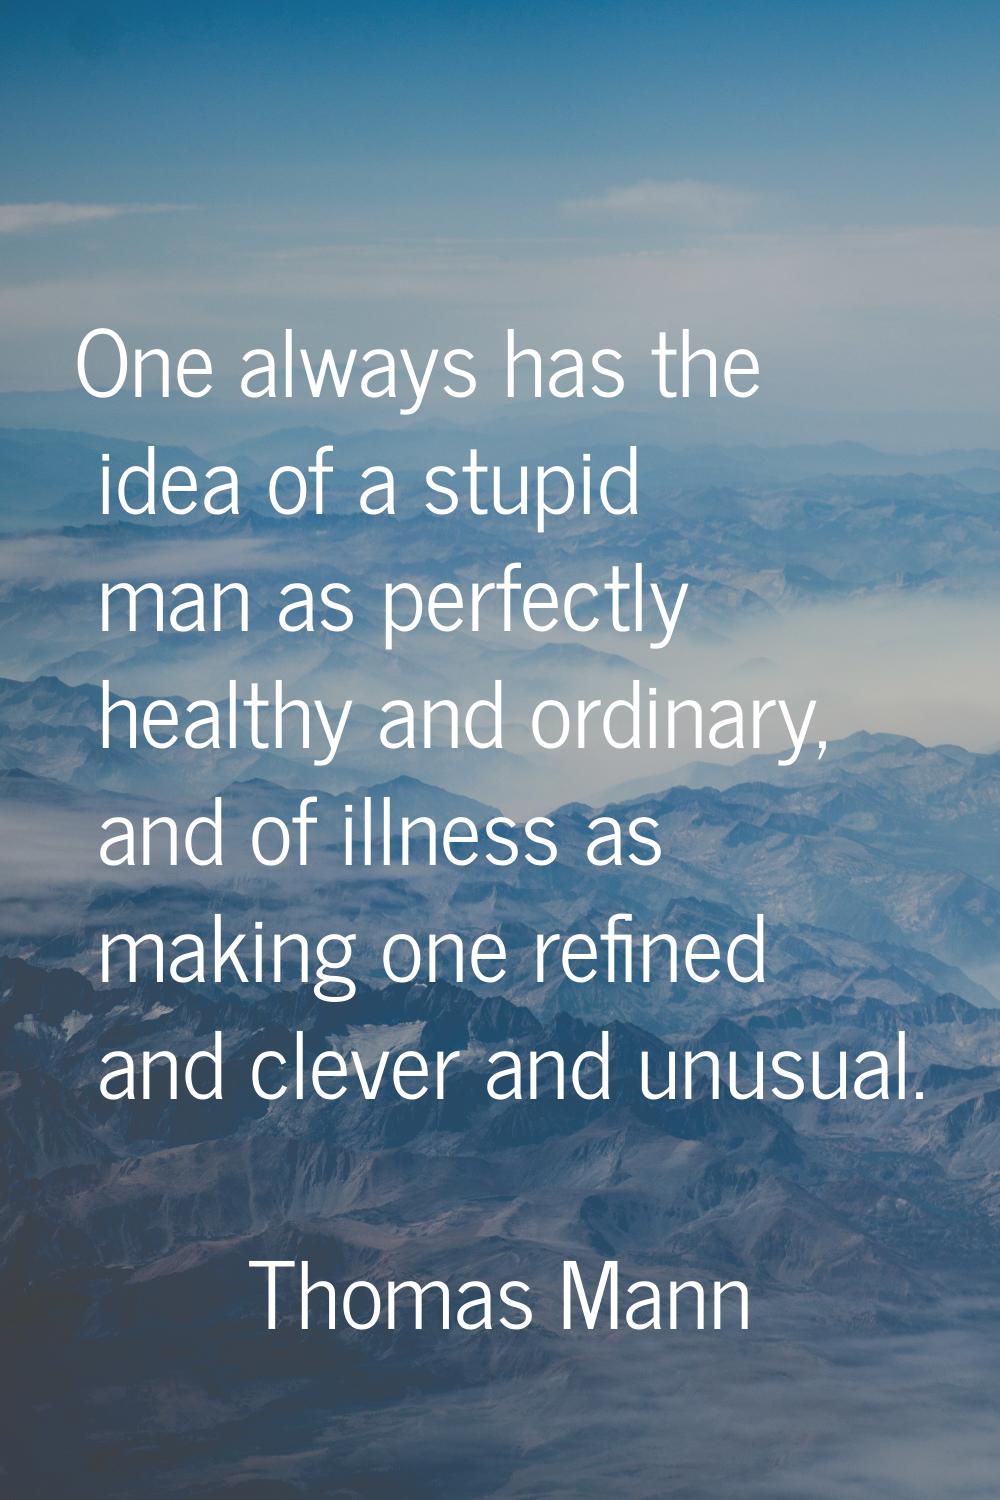 One always has the idea of a stupid man as perfectly healthy and ordinary, and of illness as making